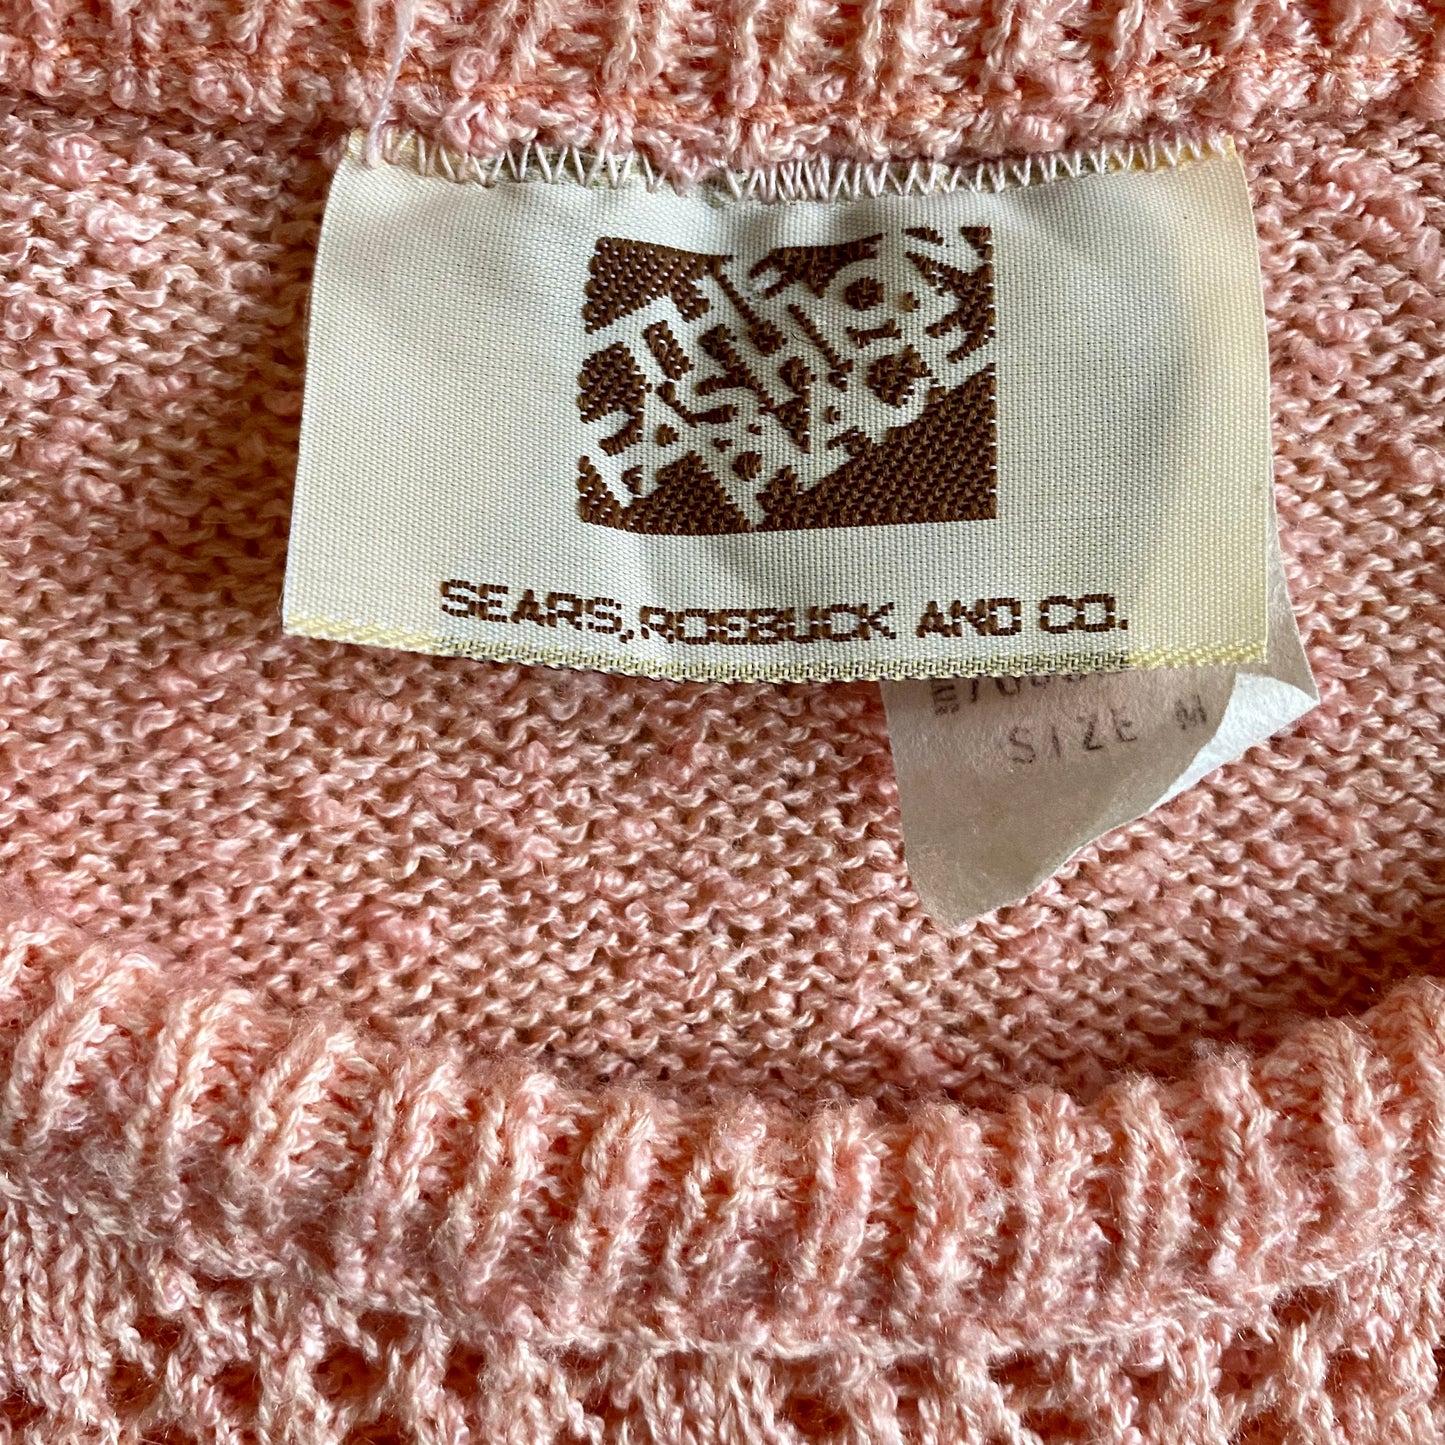 Early 80s Sears, The Fashion Place Sweater